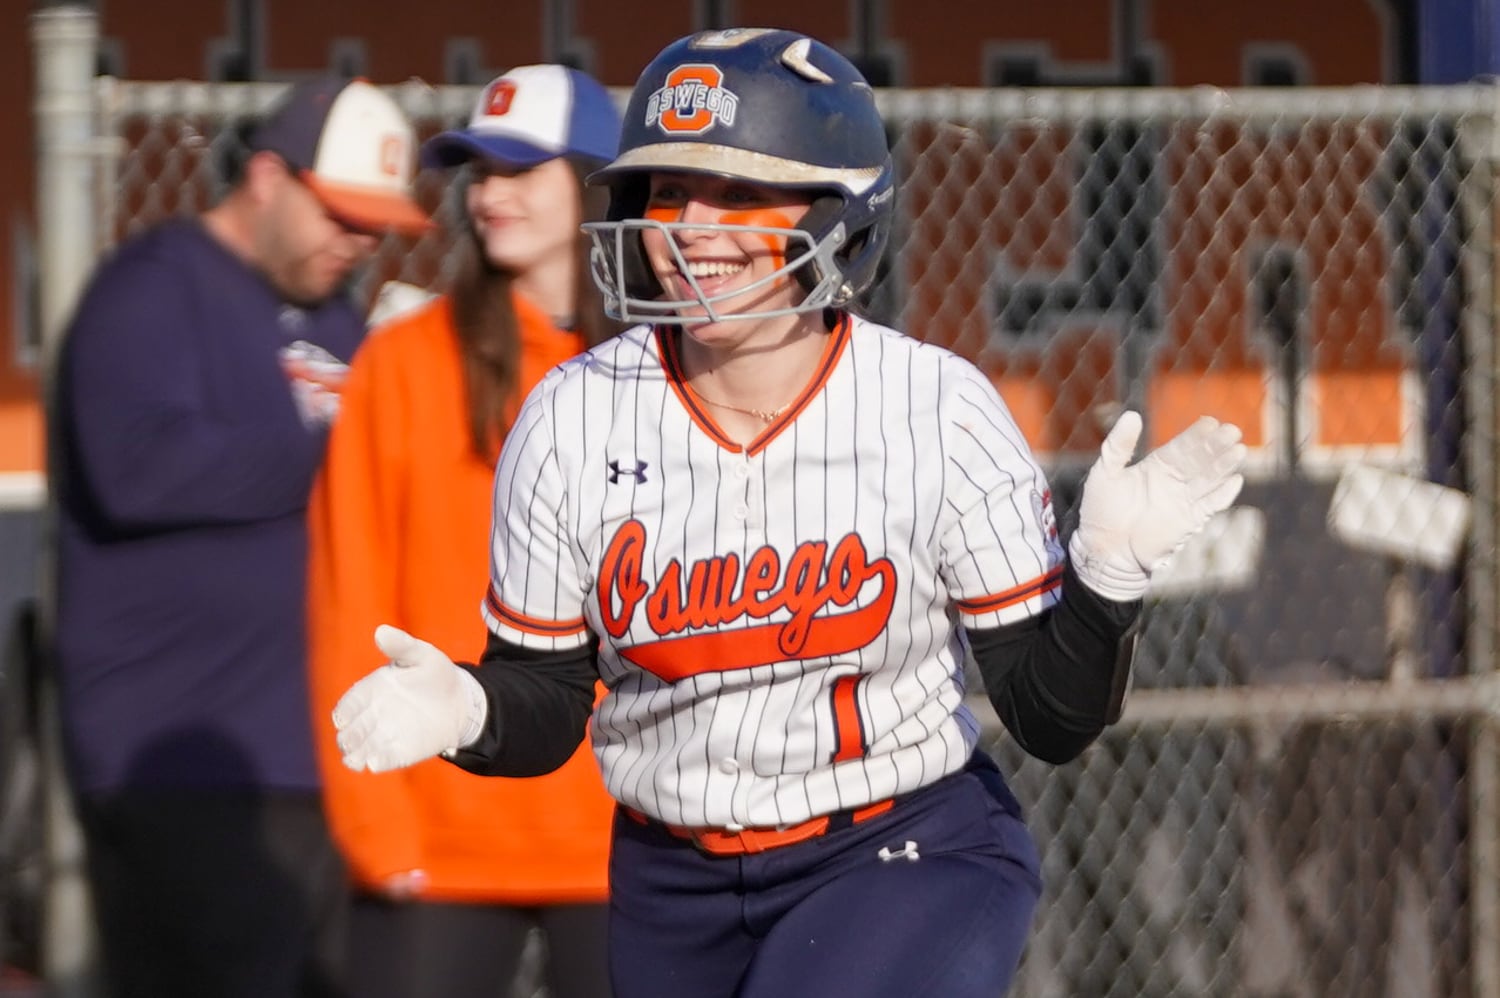 Softball: Oswego hits 4 homers, blasts past Downers Grove South